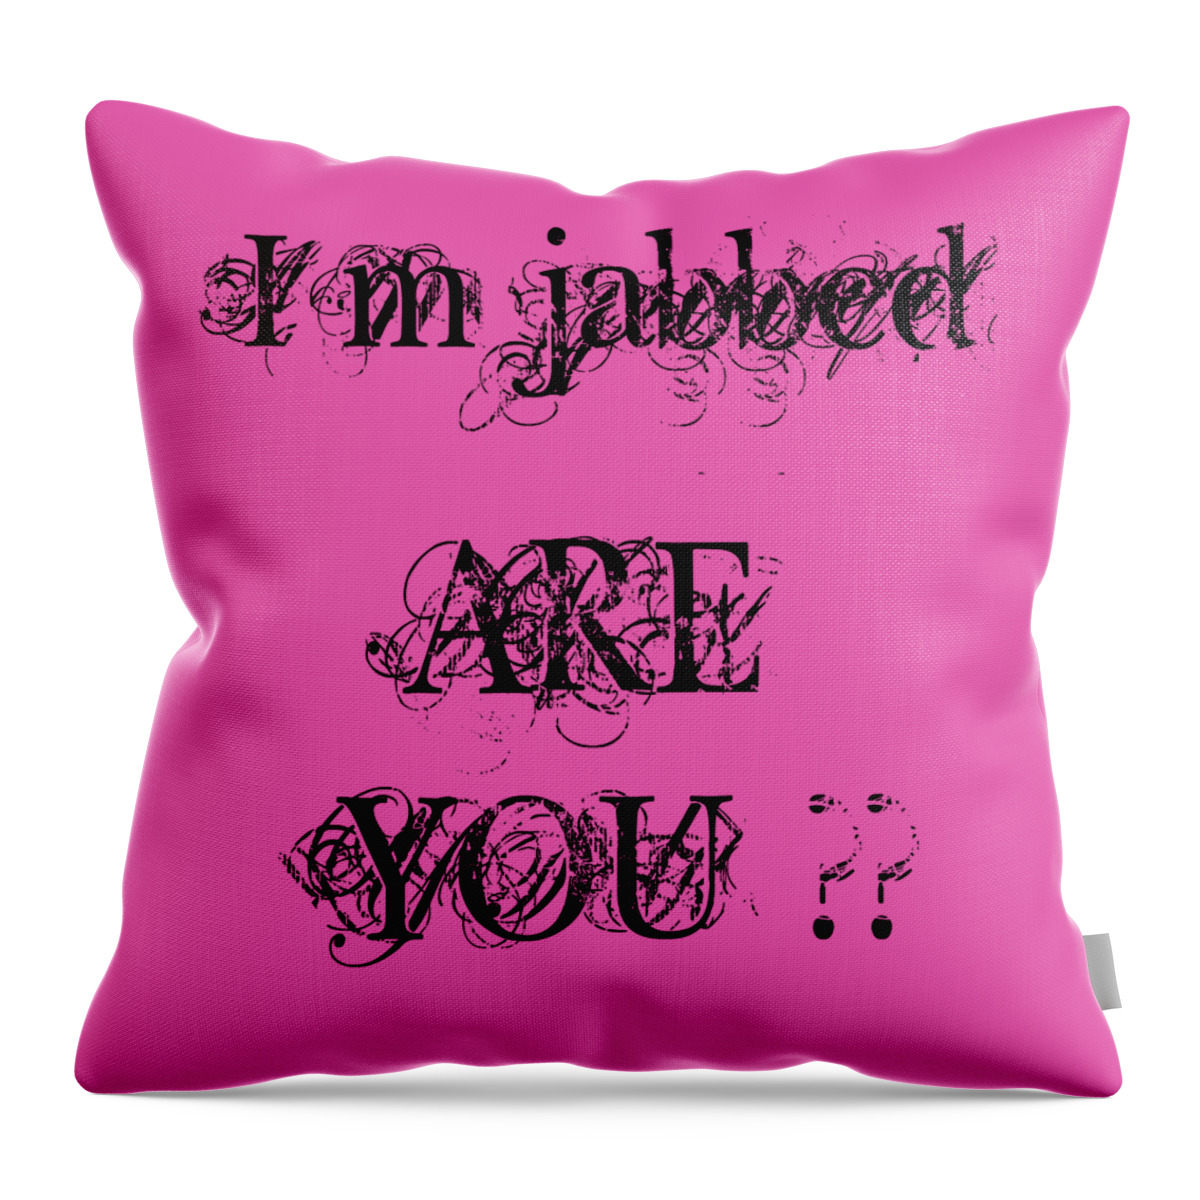 I'm Jabbed Throw Pillow featuring the photograph I'm Jabbed by Kaye Menner by Kaye Menner